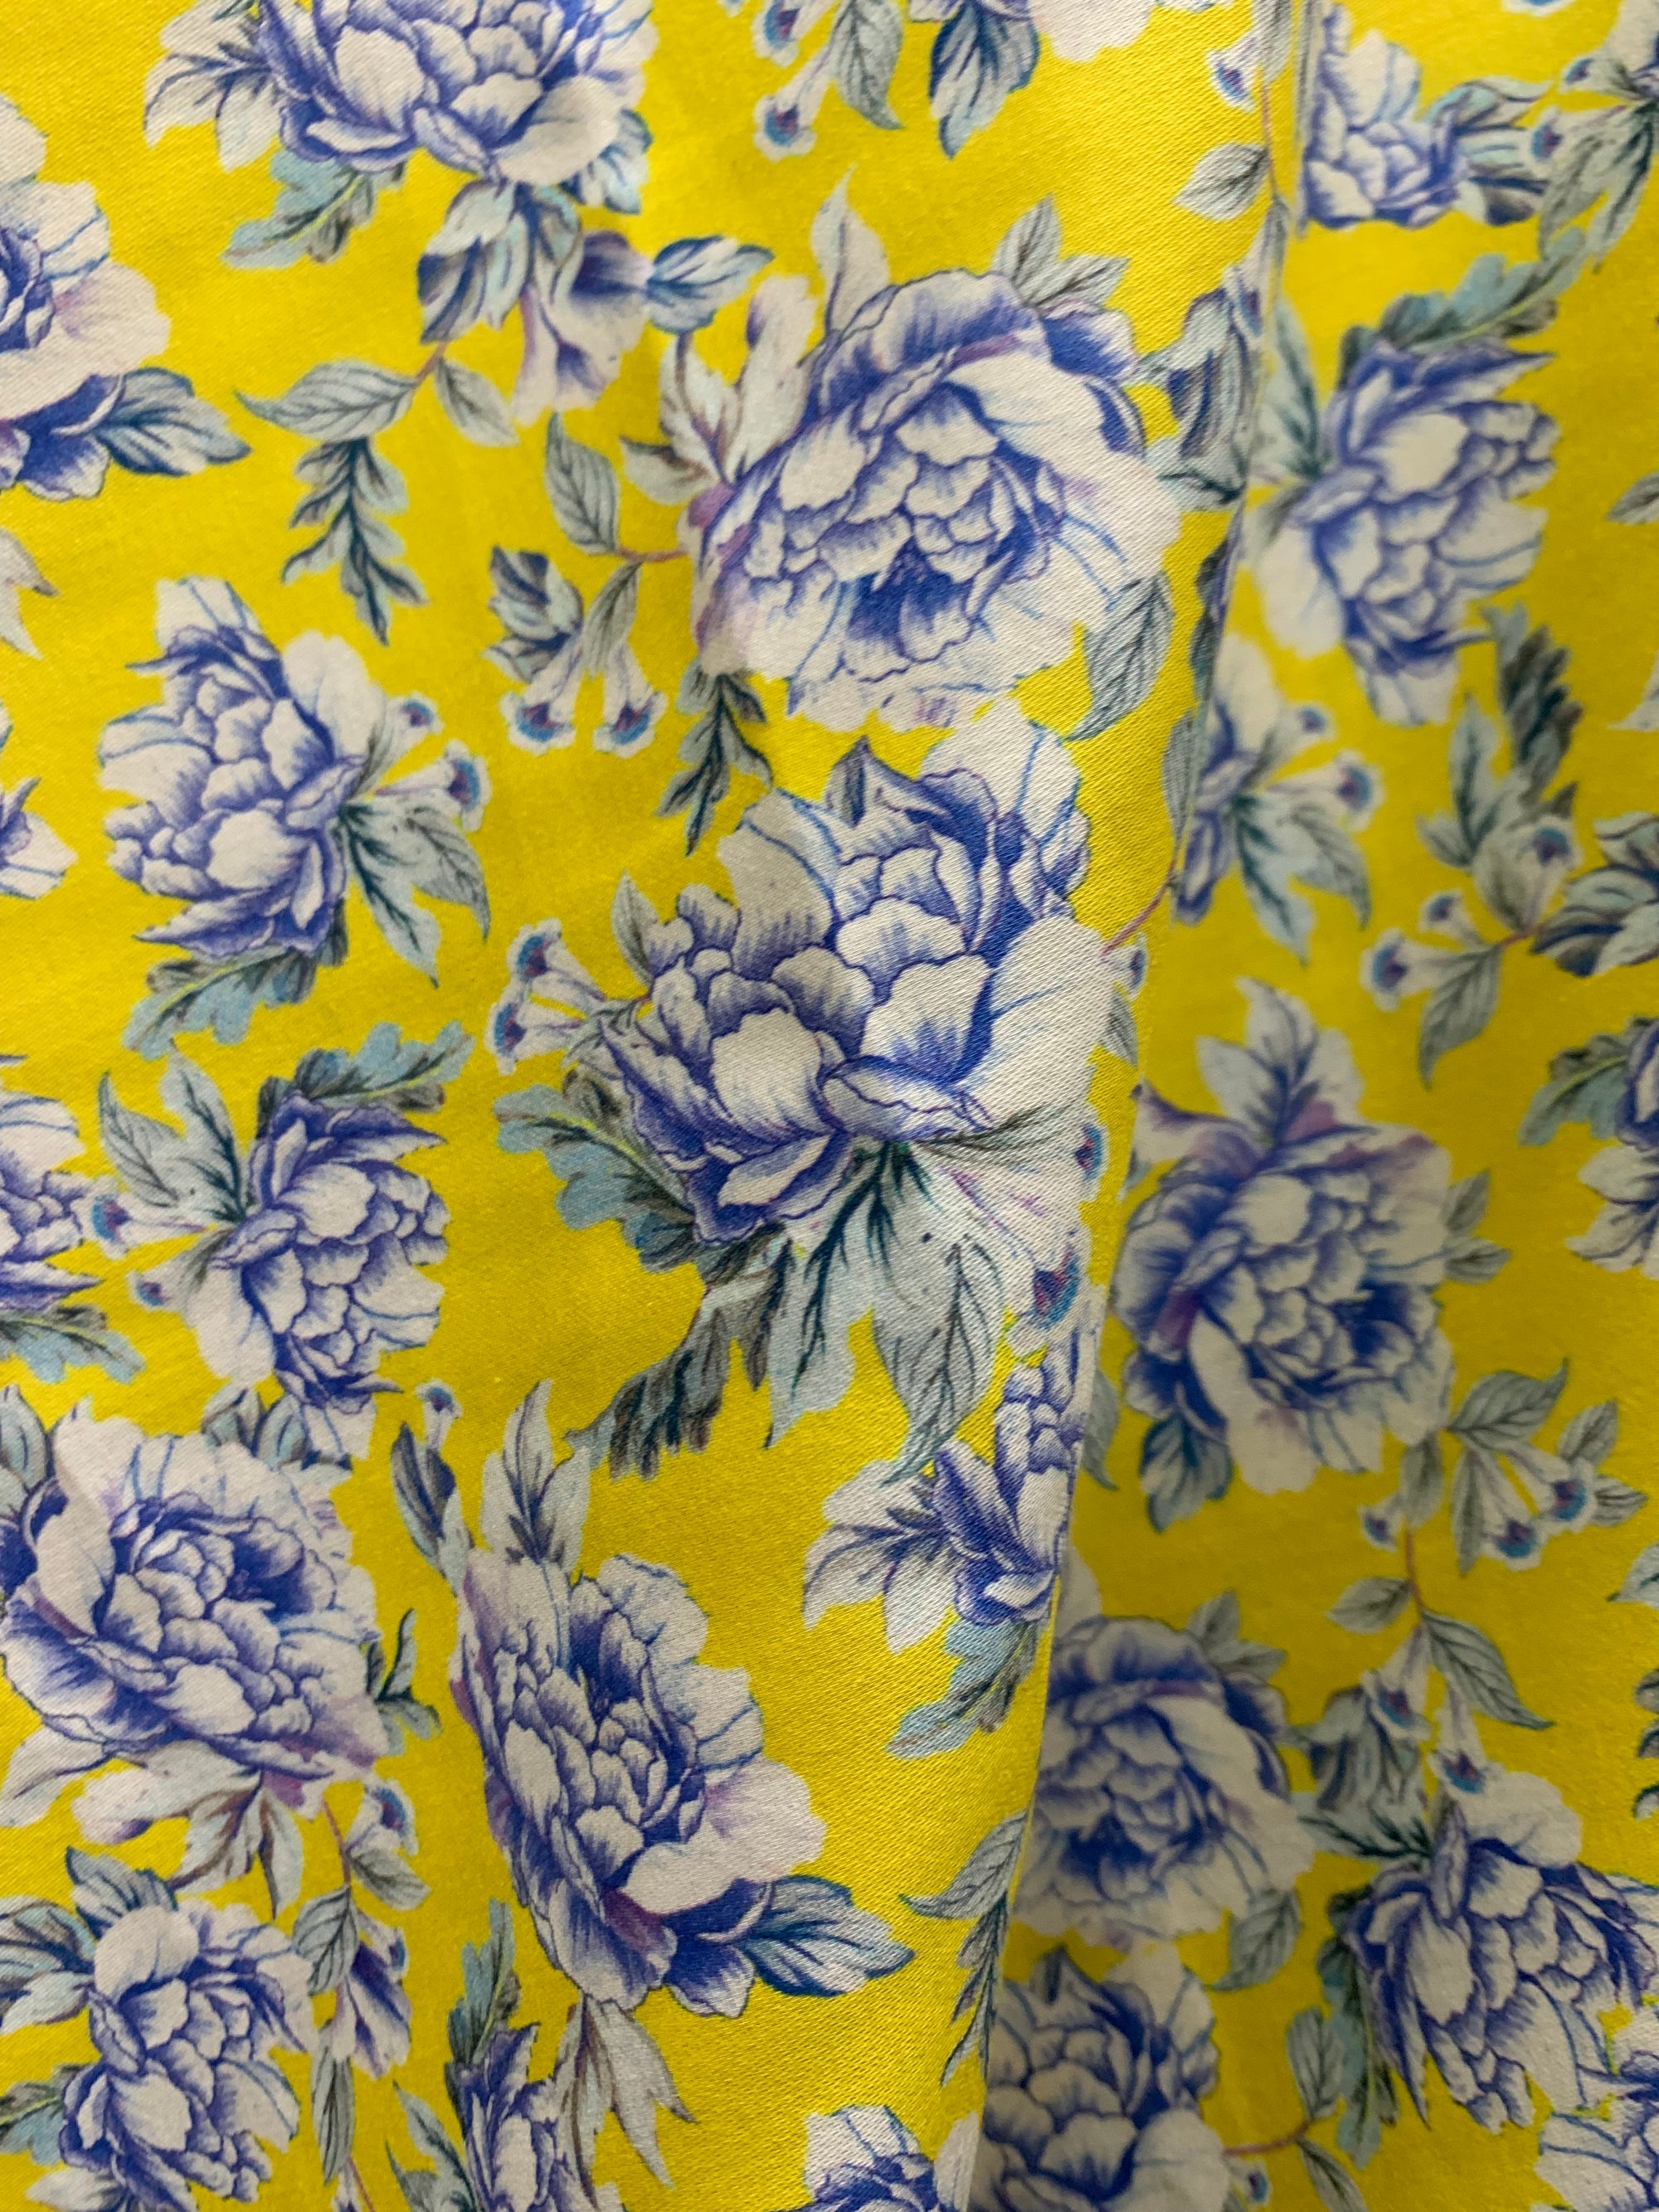 cotton lawn fabric with yellow and  blue/white flowers on a background of yellow with a measuring tape on the bottom